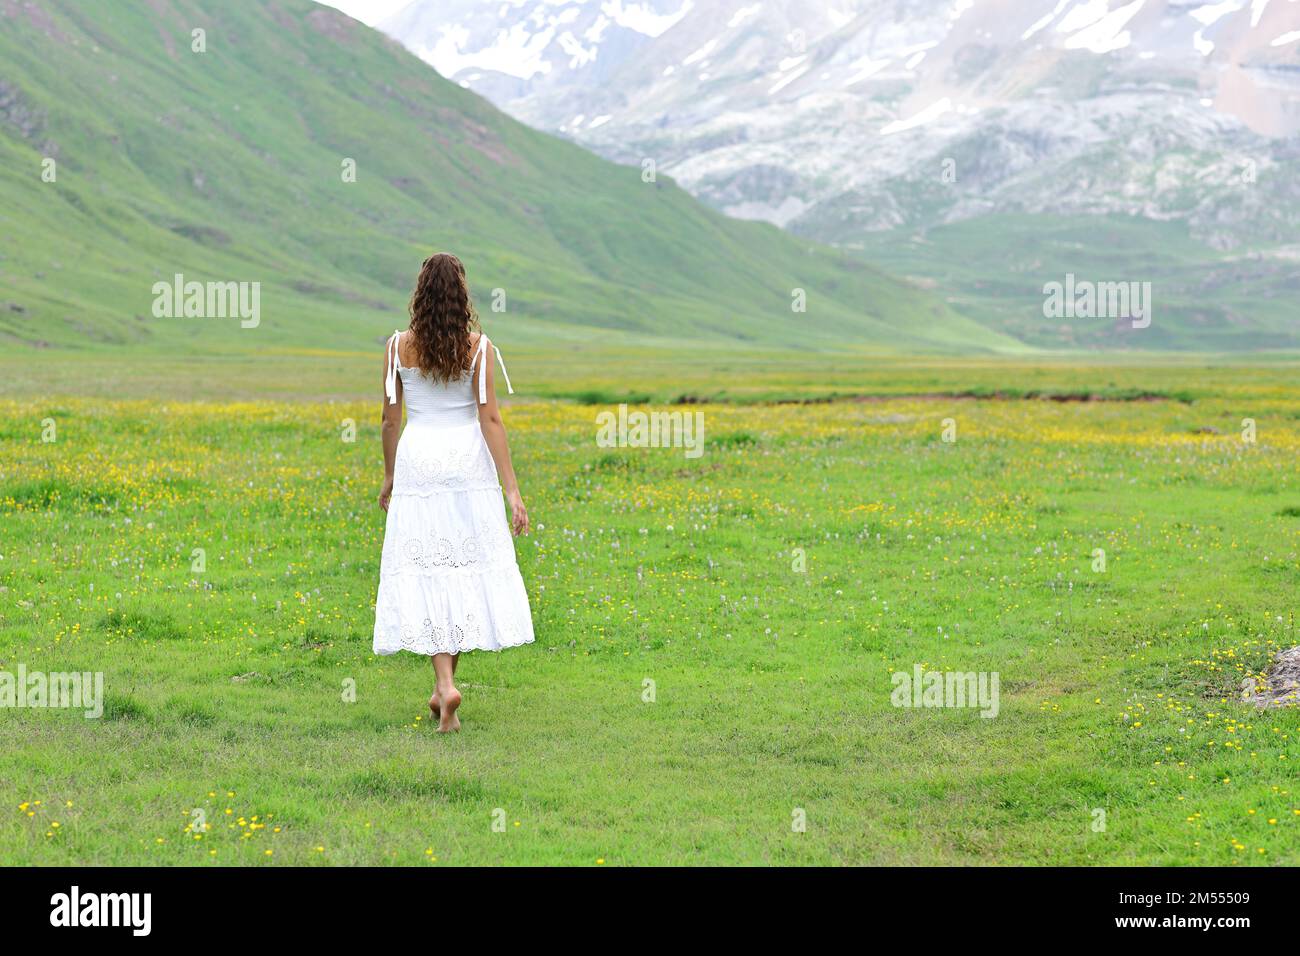 Back view of a woman in white dress walking in a green field in the mountain Stock Photo